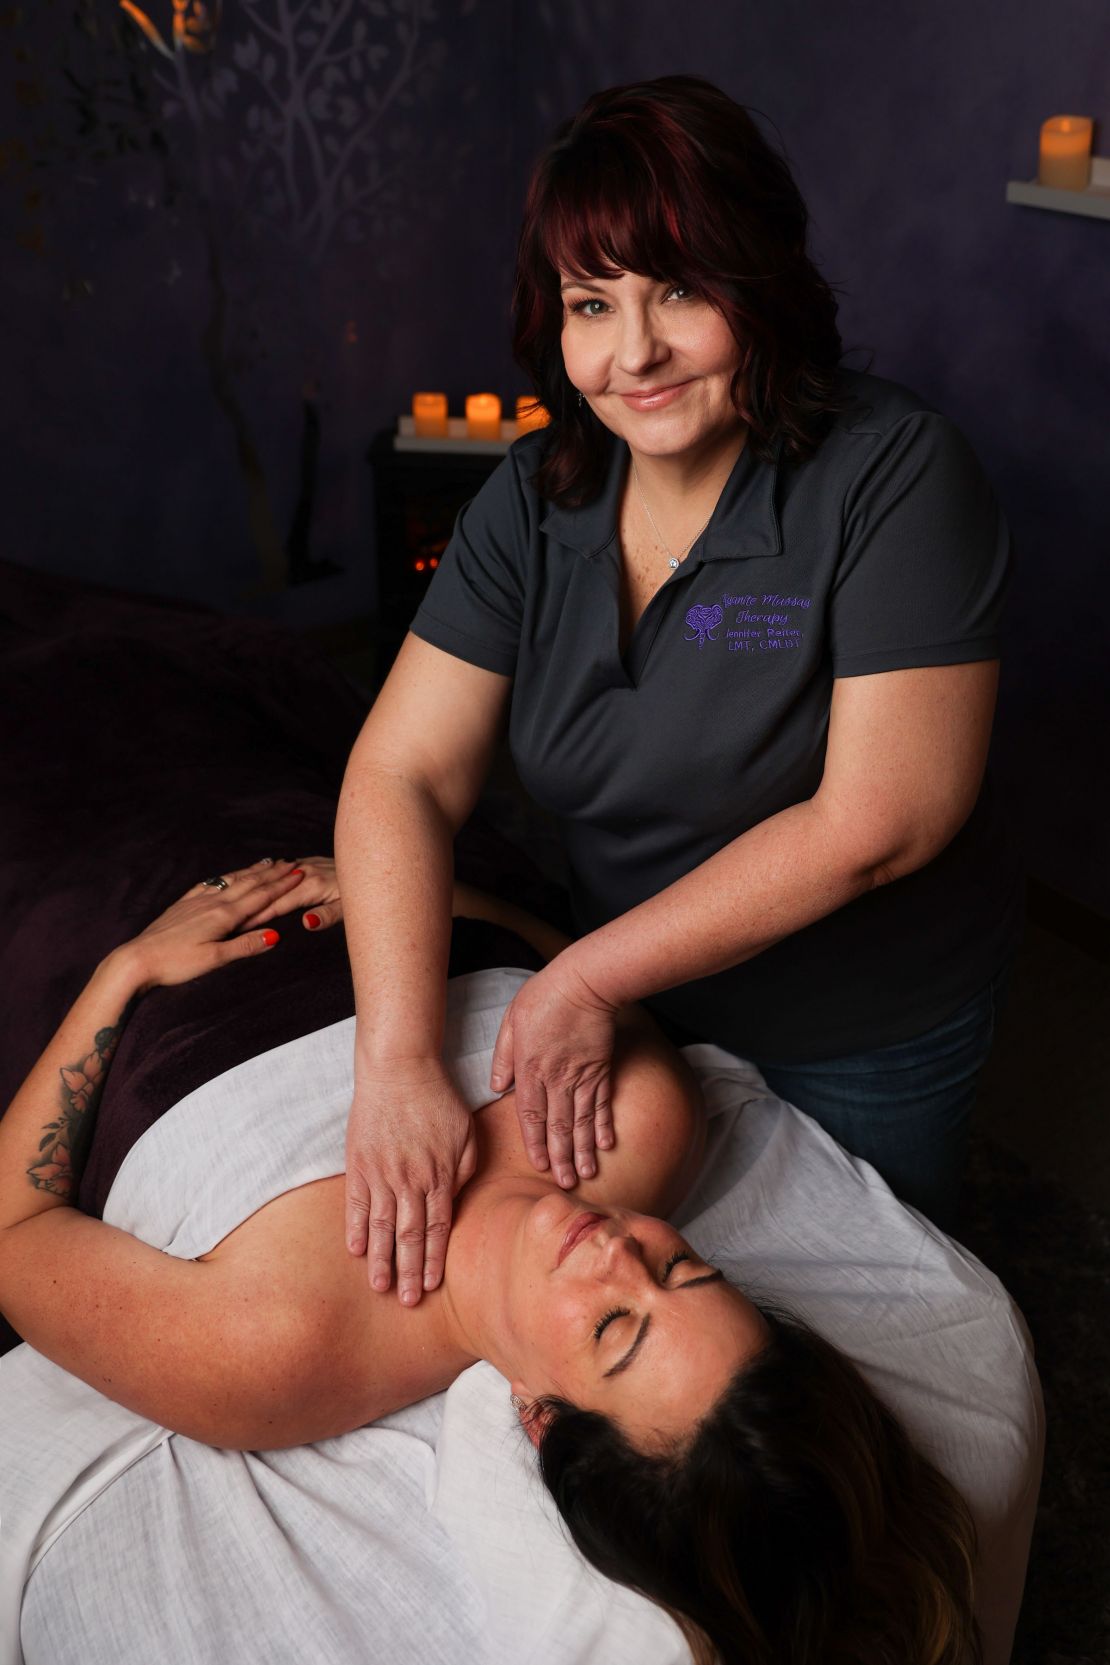 lymphatic drainage, lymphedema, plastic surgery